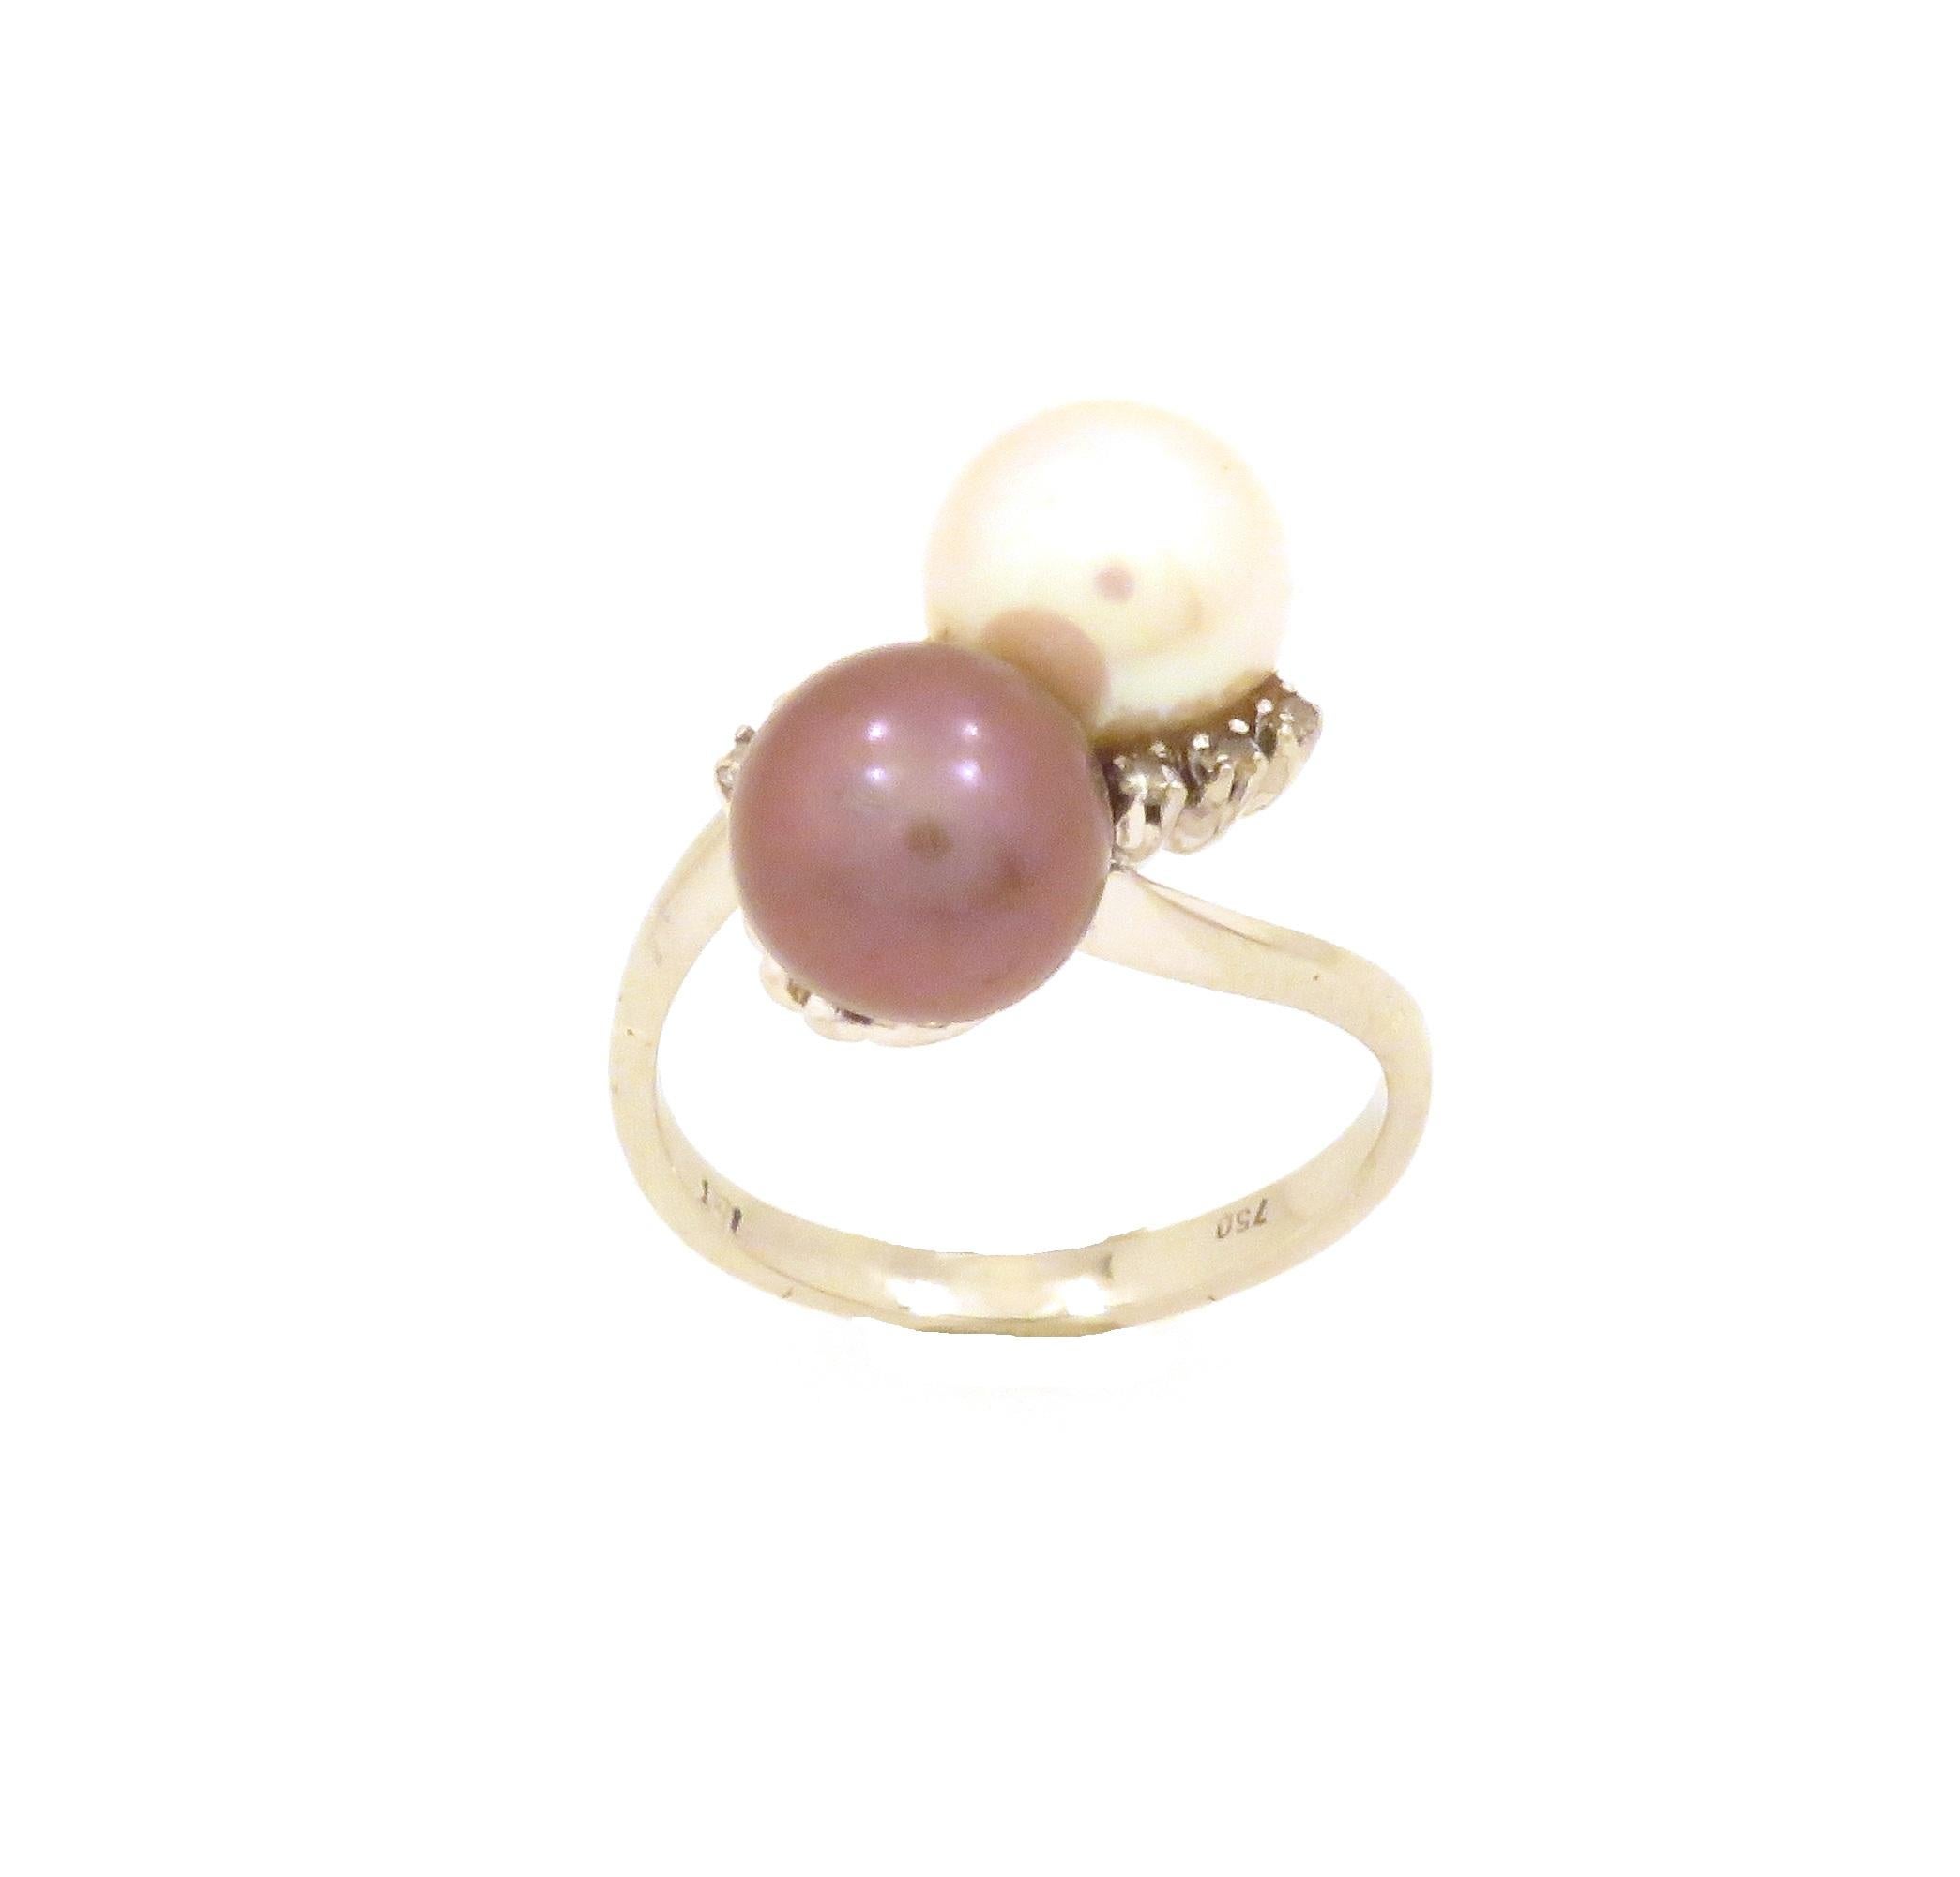 Diamonds Pearls 18 Karat White Gold Vintage Ring Handcrafted in Italy For Sale 3